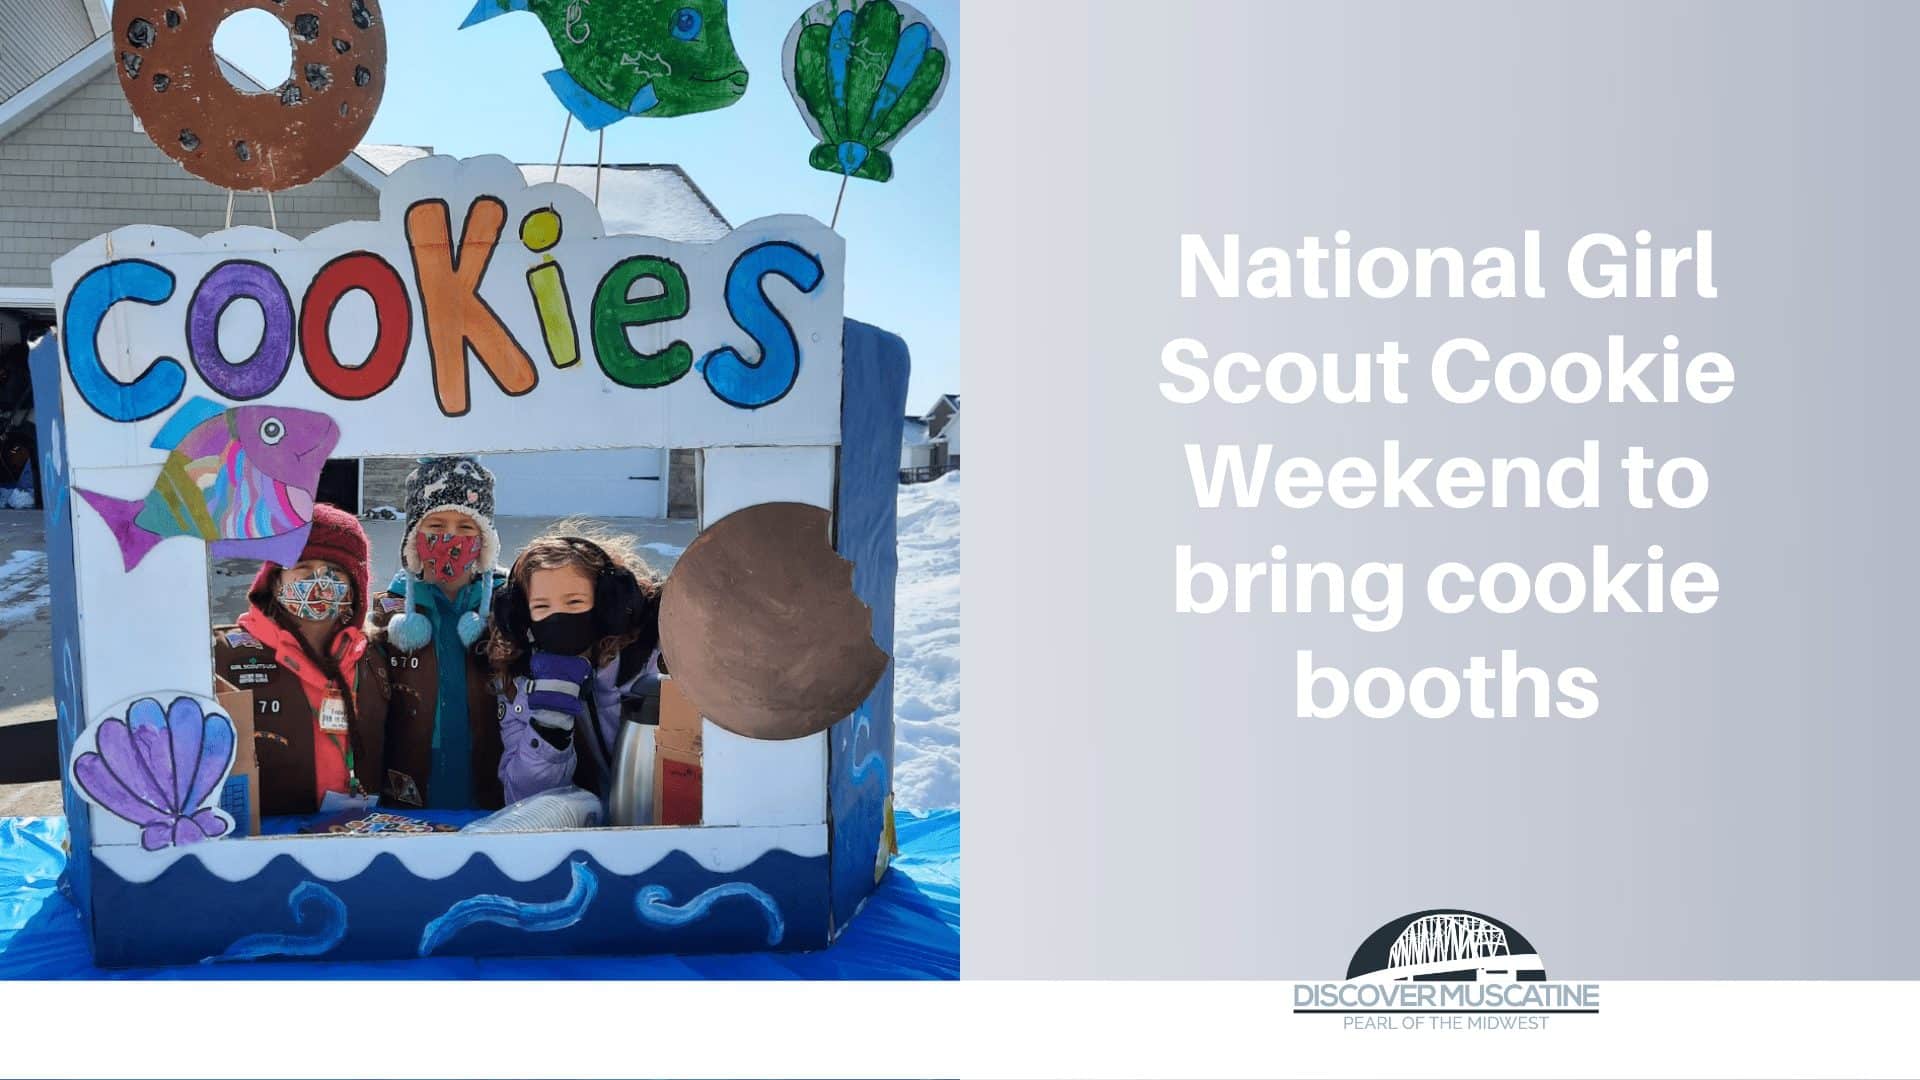 National Girl Scout Cookie Weekend to bring cookie booths